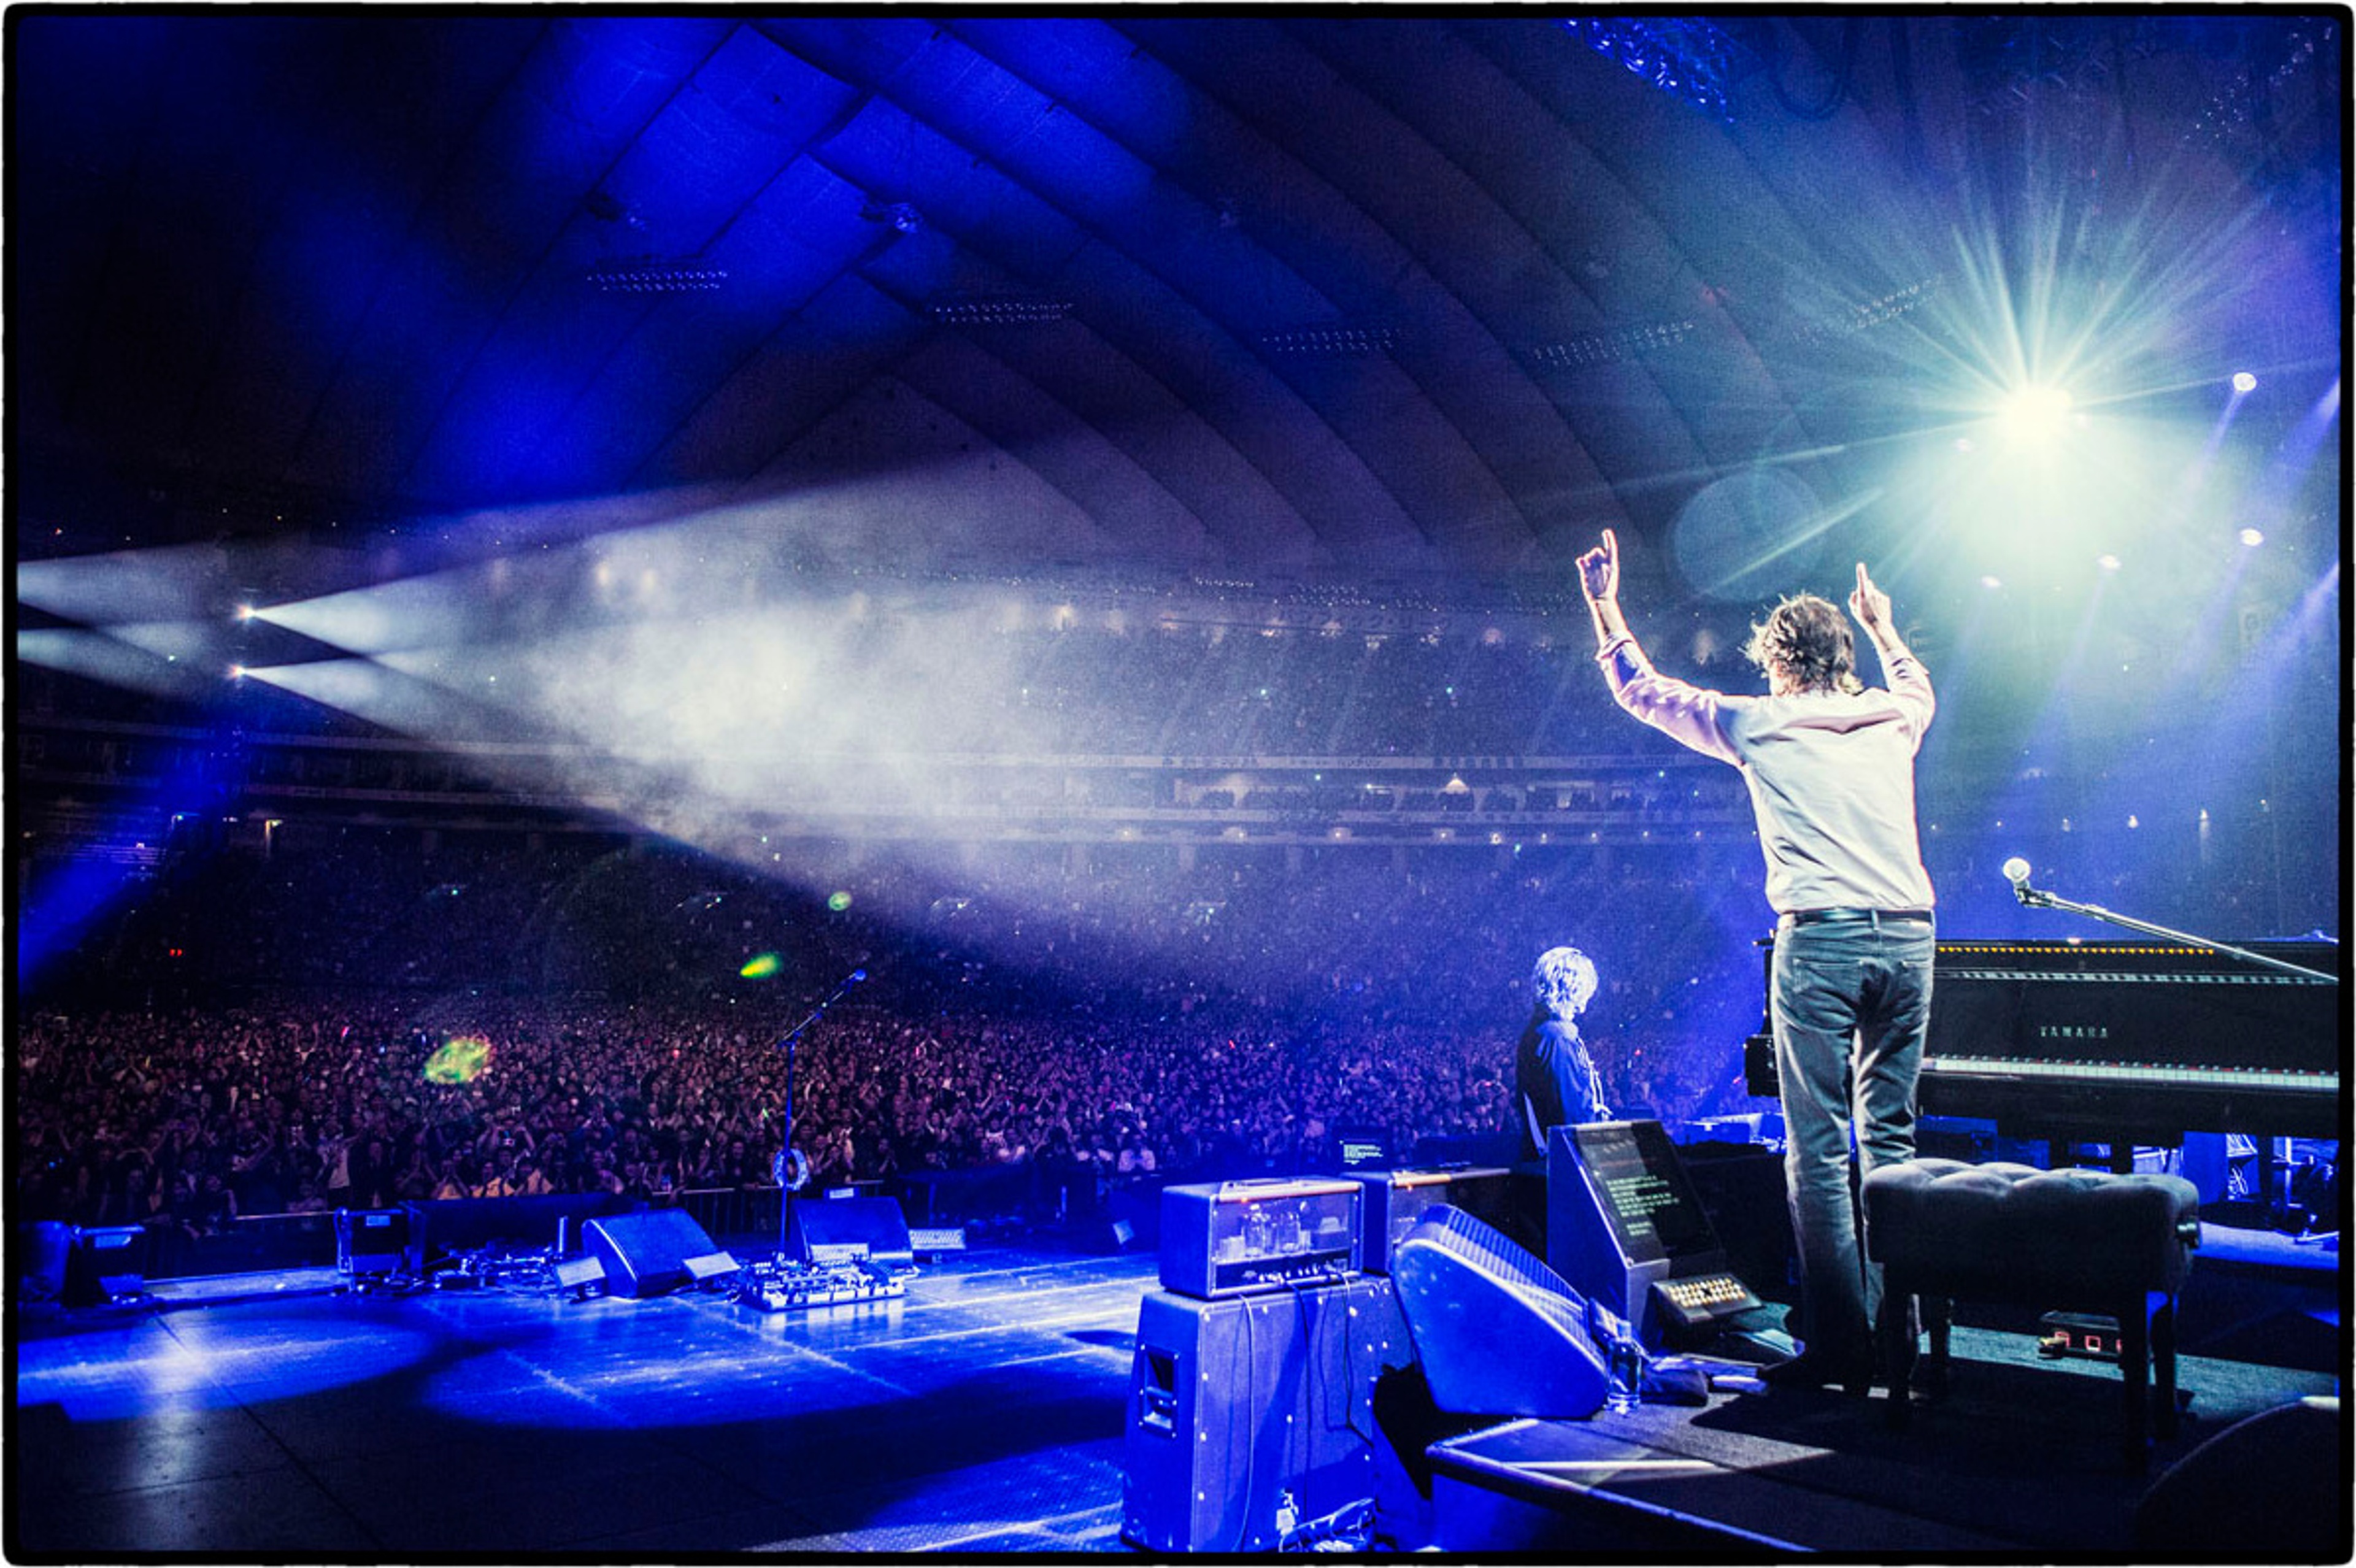 Paul on stage, Tokyo, 19th November 2013